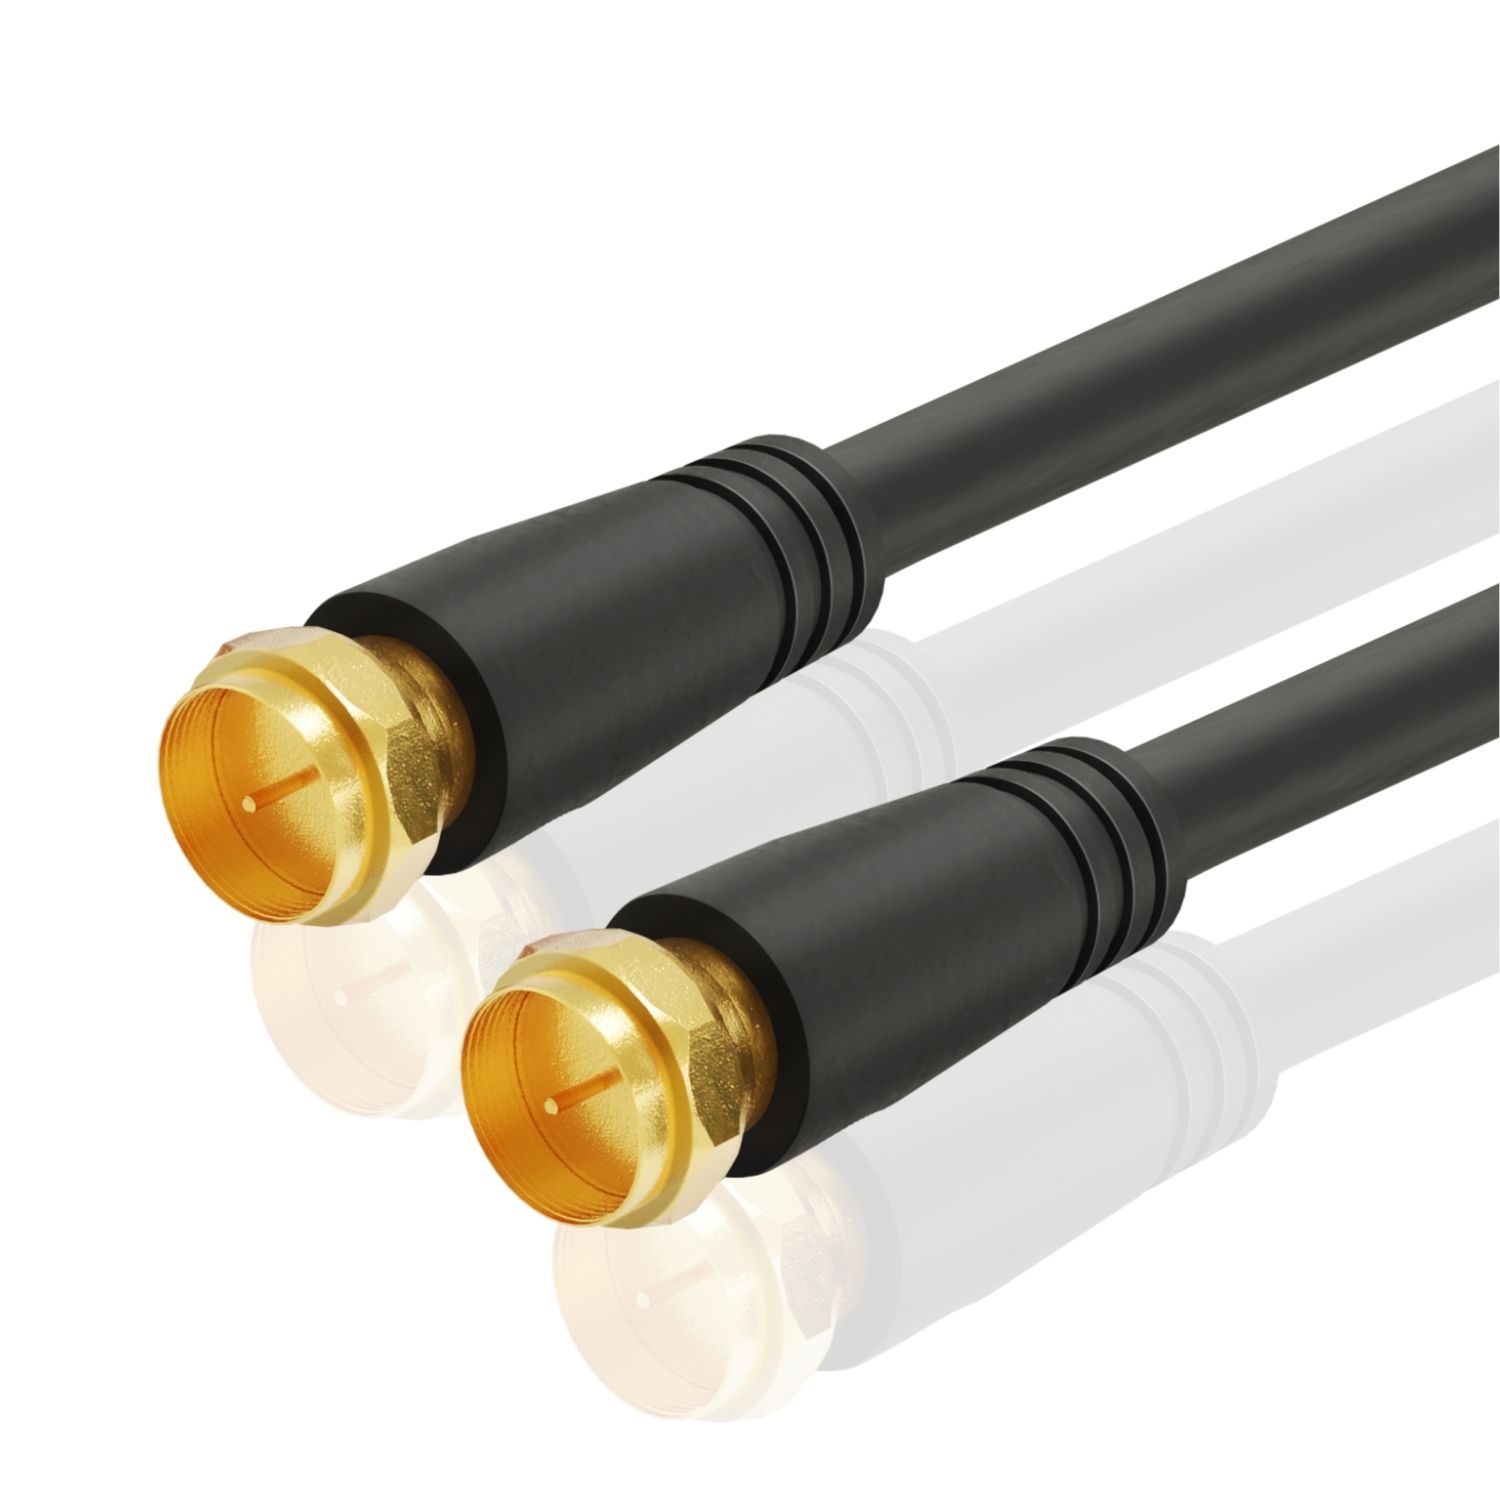 Coaxial Cable (1.5 Feet) with F Connectors F-Type Pin Plug Socket Male Twist-On Adapter Jack with Shielded RG59 RG-59/U Coax Patch Cable Wire Cord Black